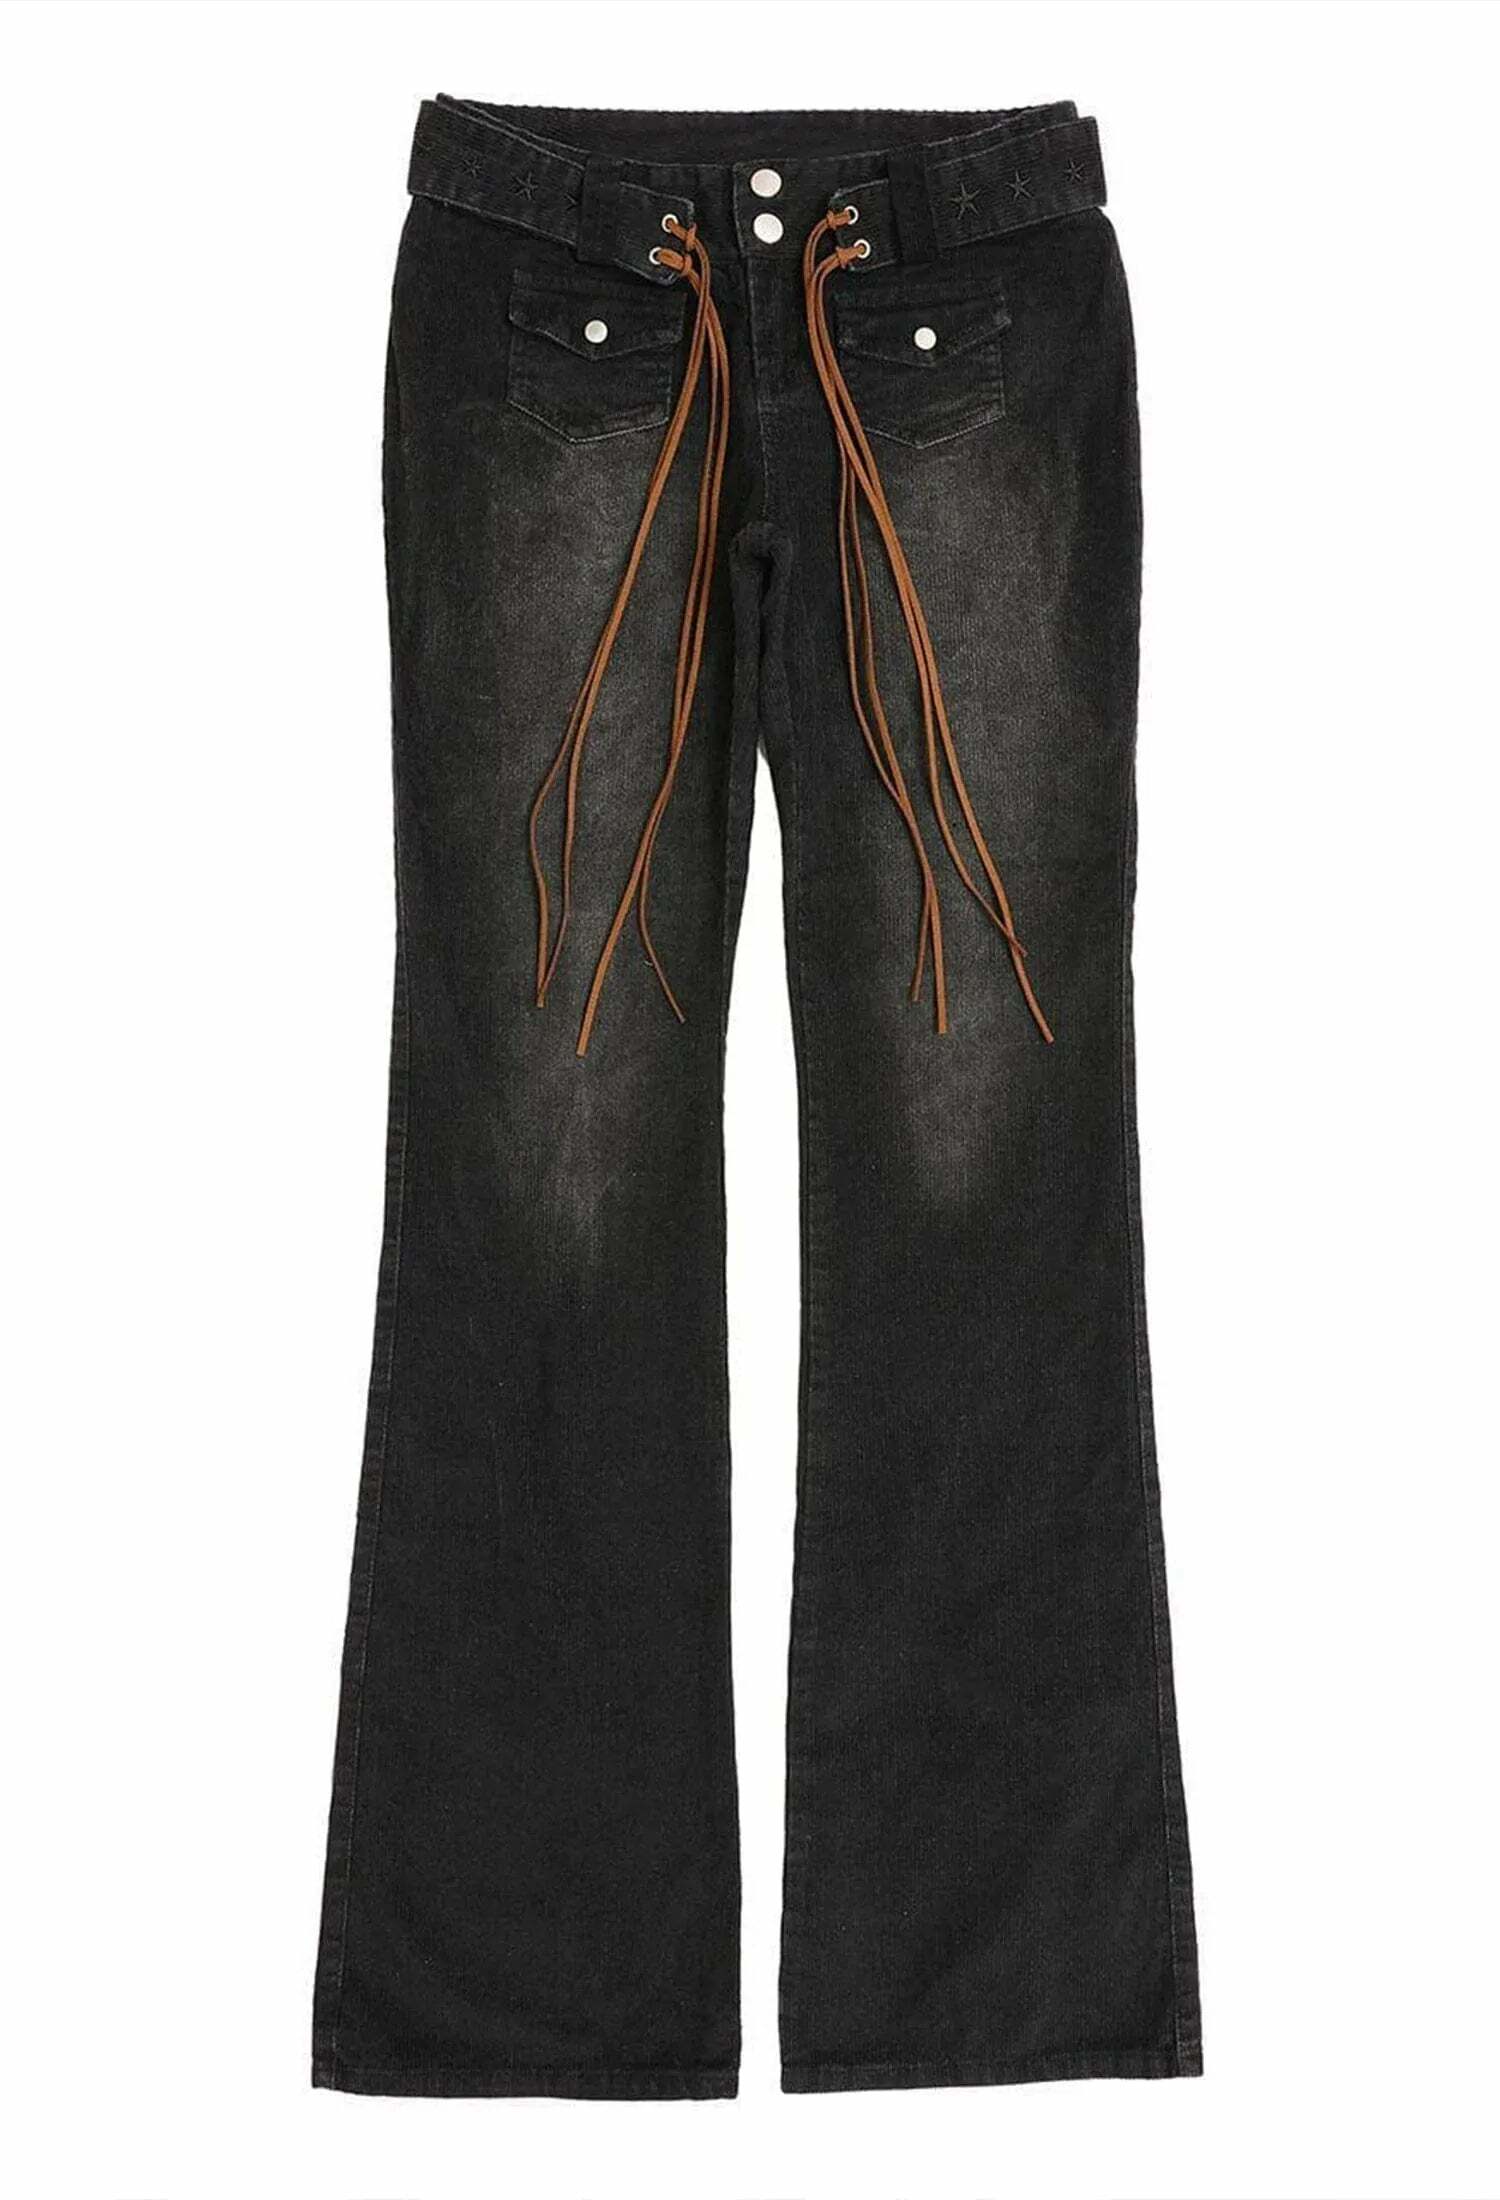 laceup flared jeans edgy streetwear essential 6945